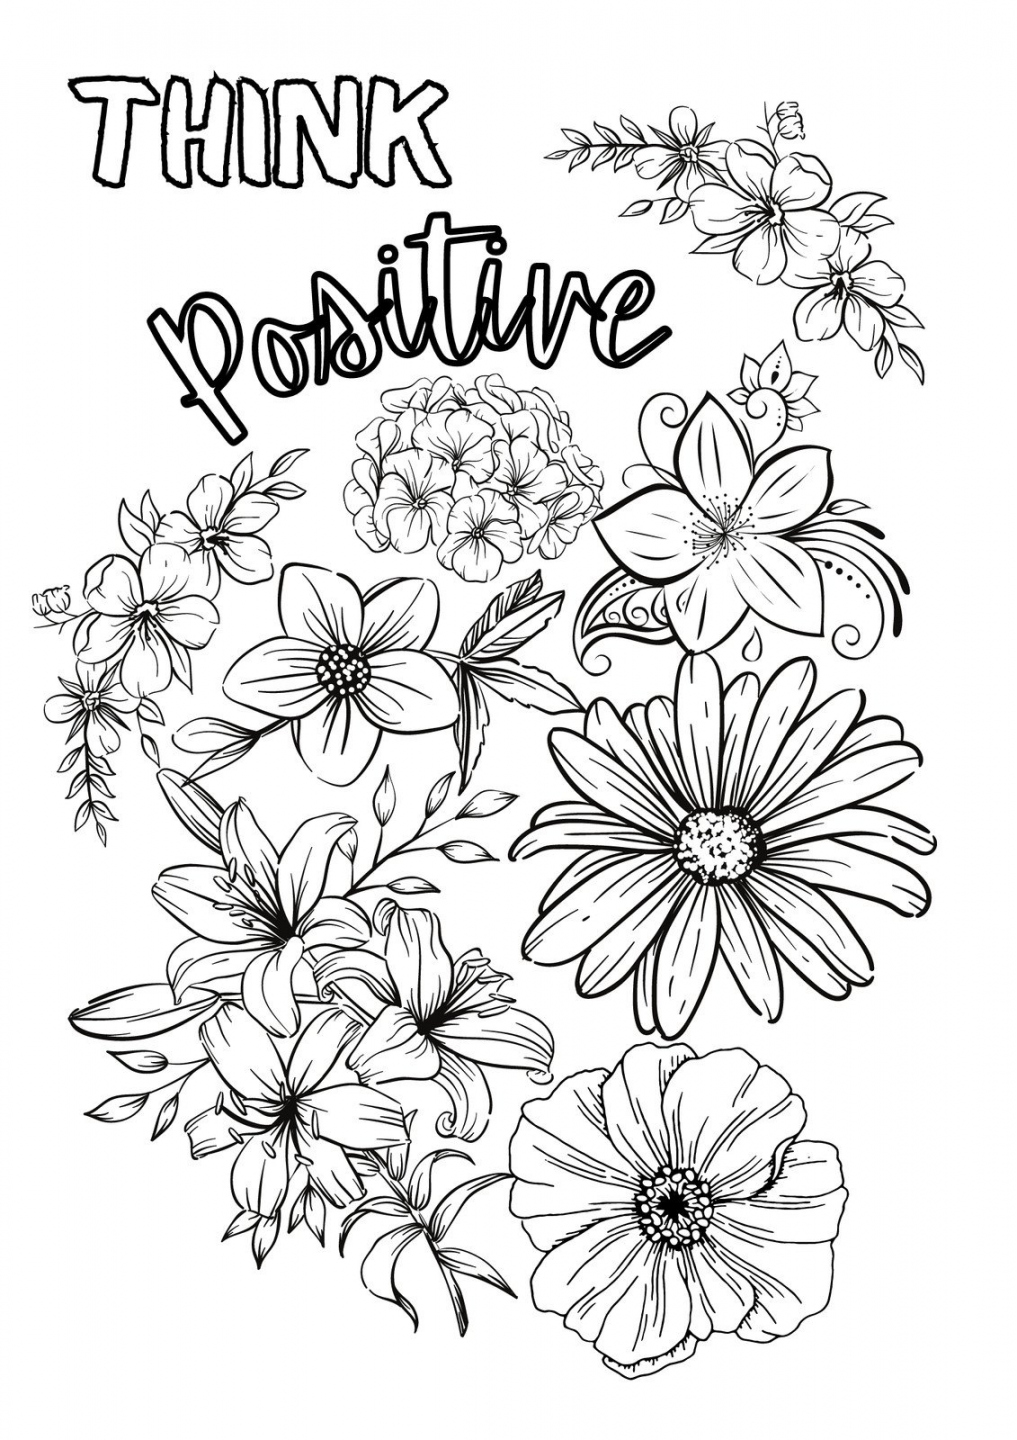 Free Printable Color Pages - Printable - Free printable coloring page templates to customize  Canva